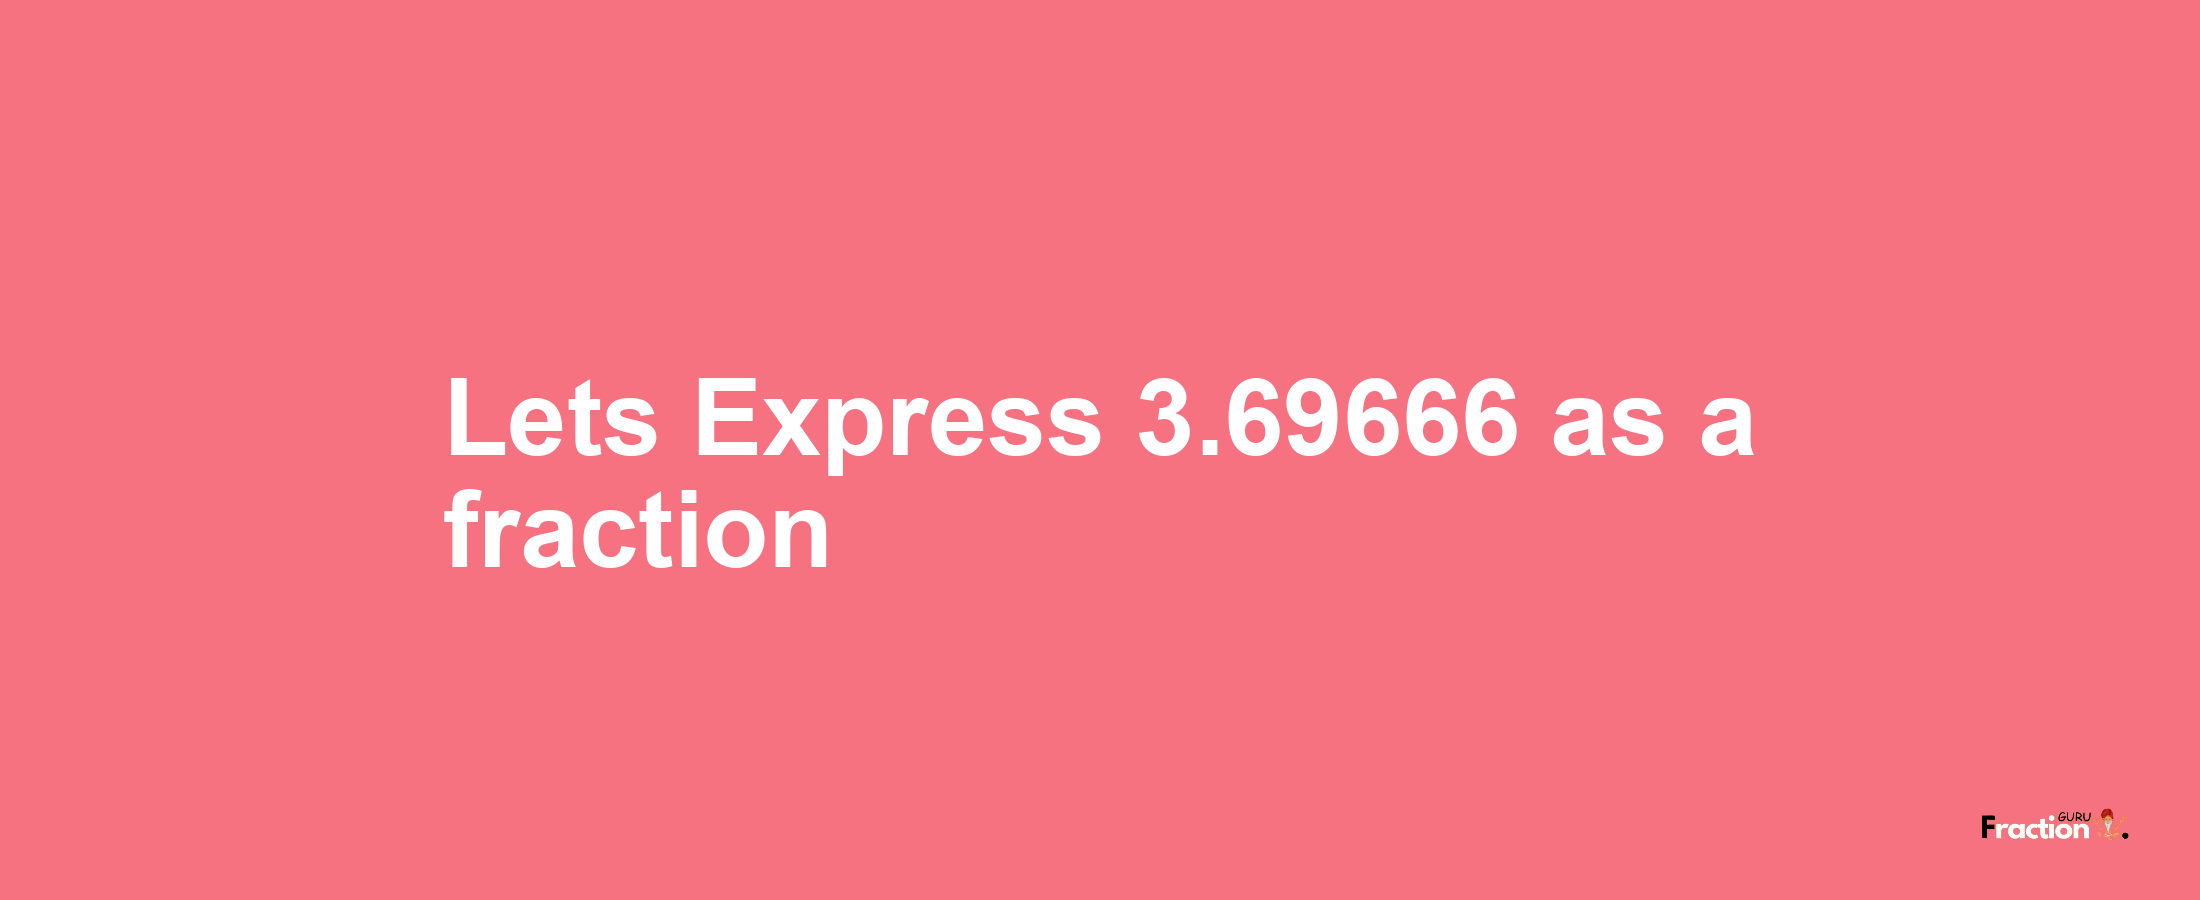 Lets Express 3.69666 as afraction